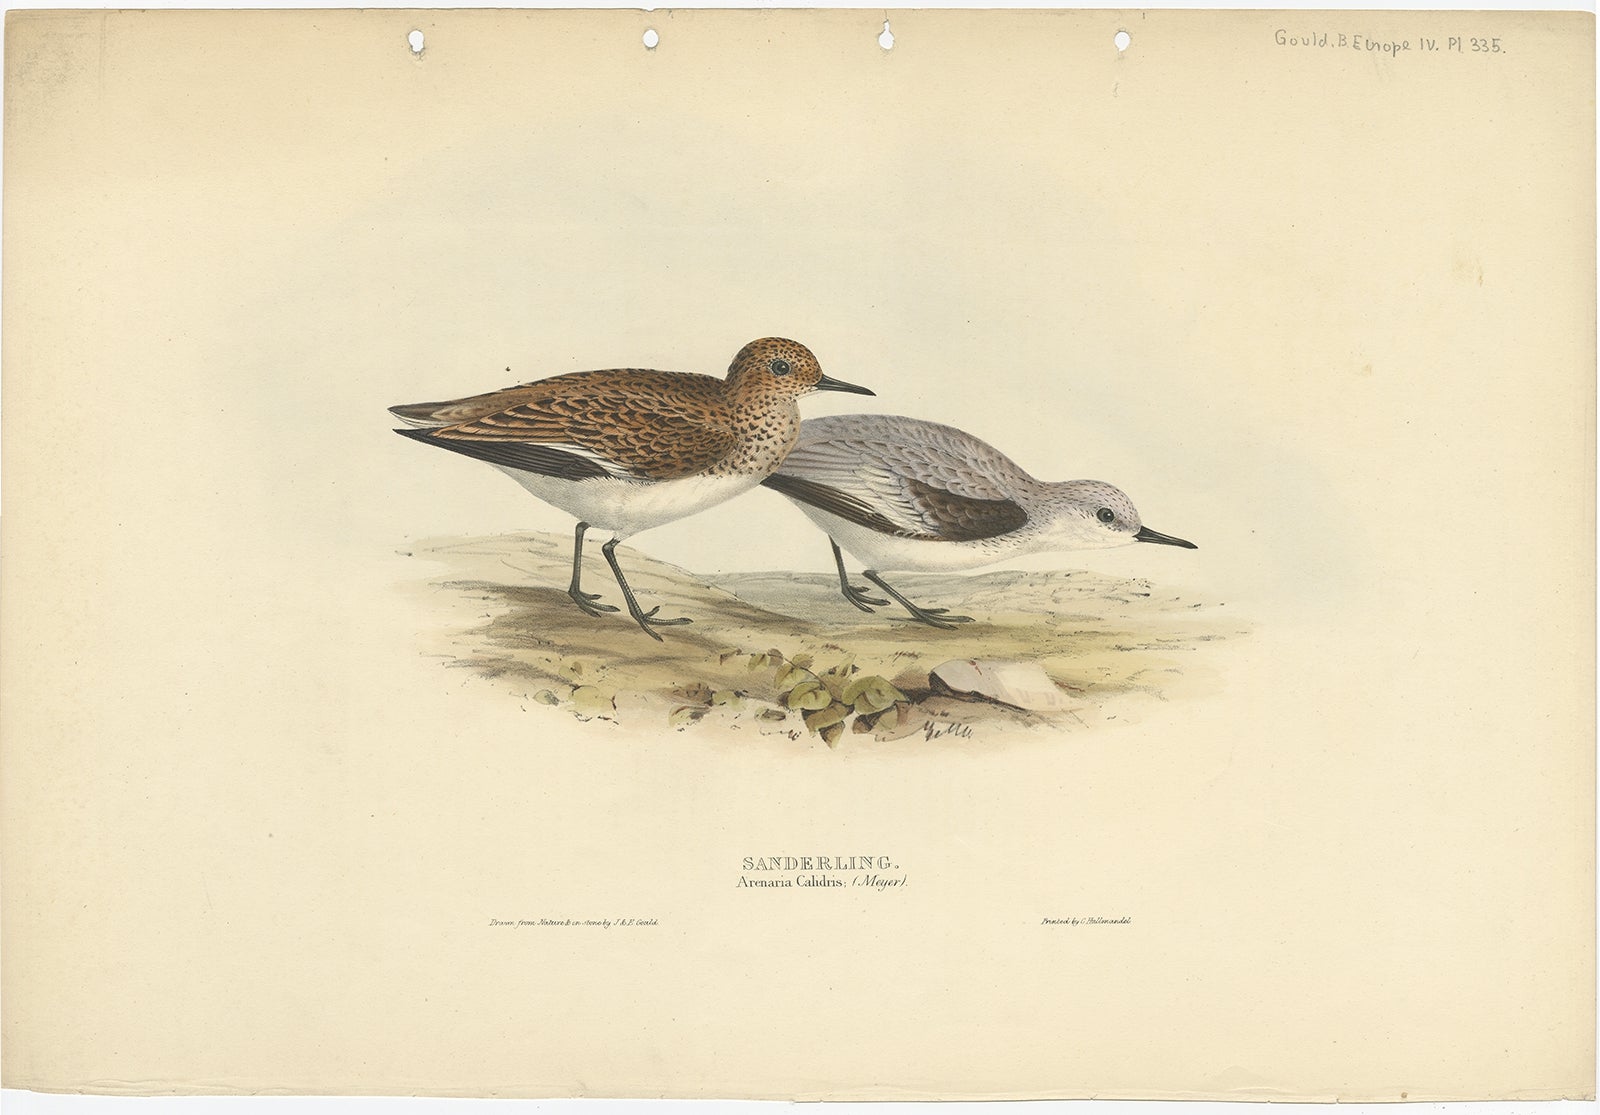 Antique bird print titled 'Sanderlingl'. Old bird print depicting the sanderling. This print originates from 'Birds of Europe' by J. Gould (1832-1837). 

The sanderling (Calidris alba) is a small wading bird. The name derives from Old English